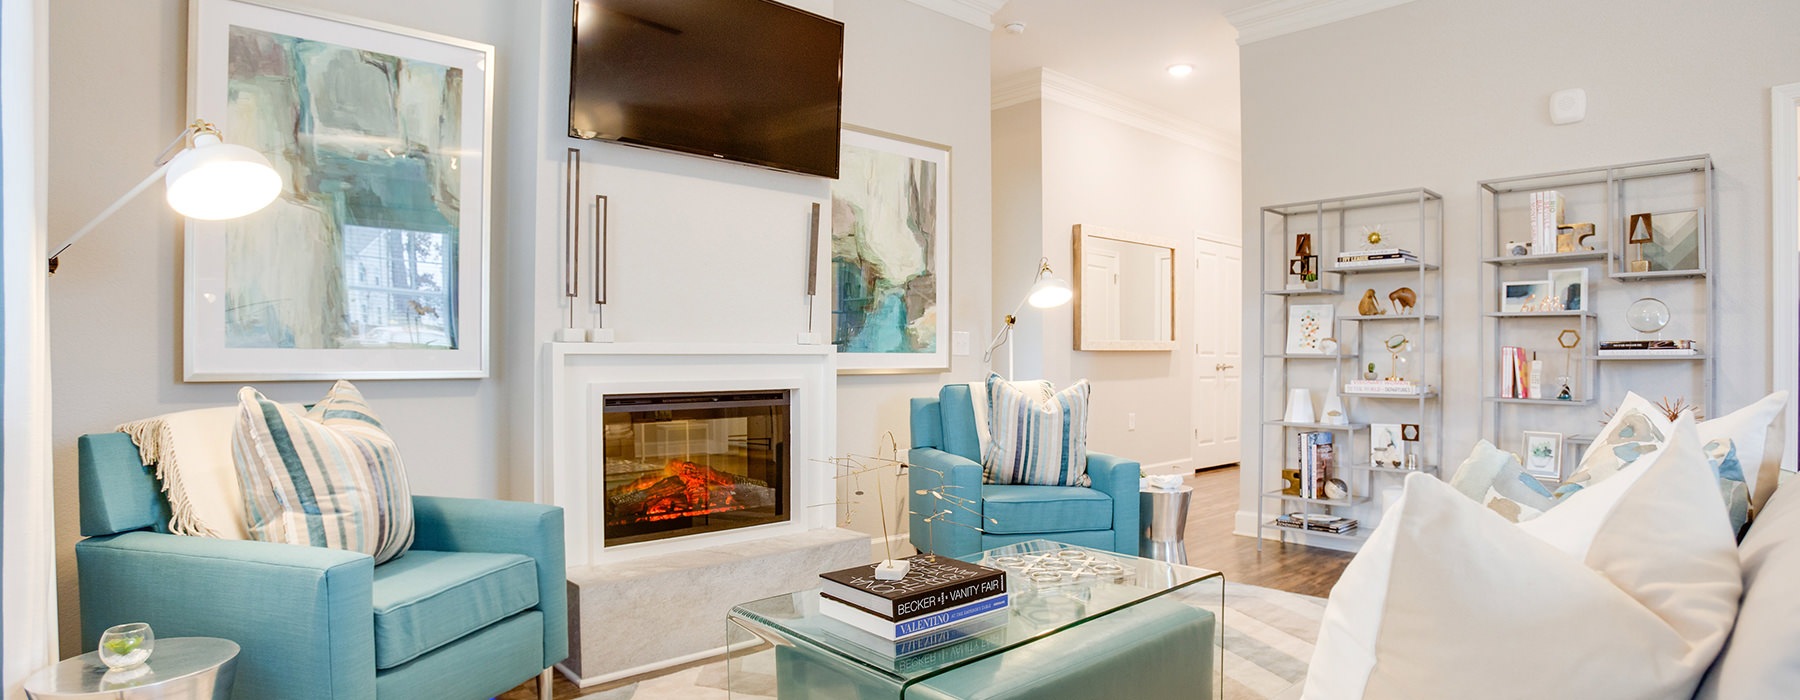 Large media room with fireplace and ample seating 